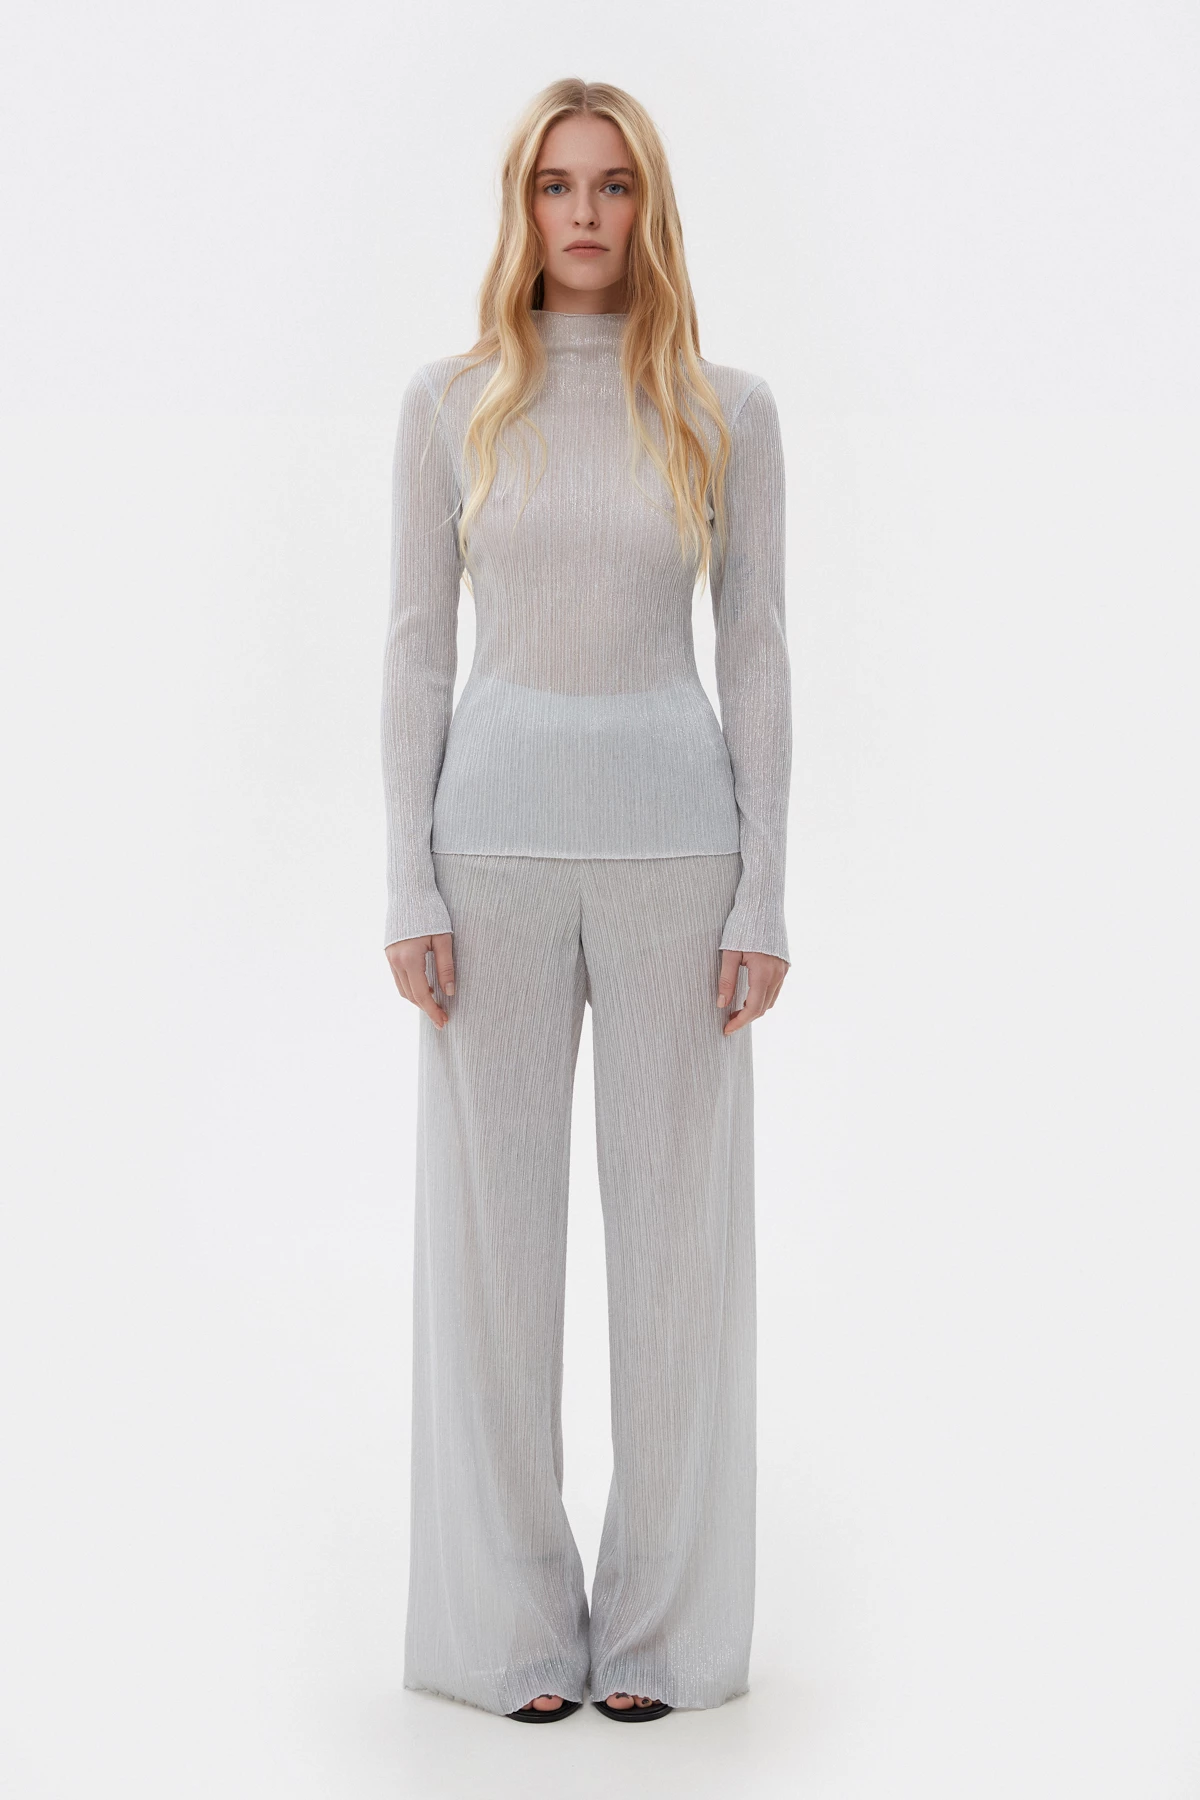 Silver pleated knit longsleeve Estro x MustHave, photo 2